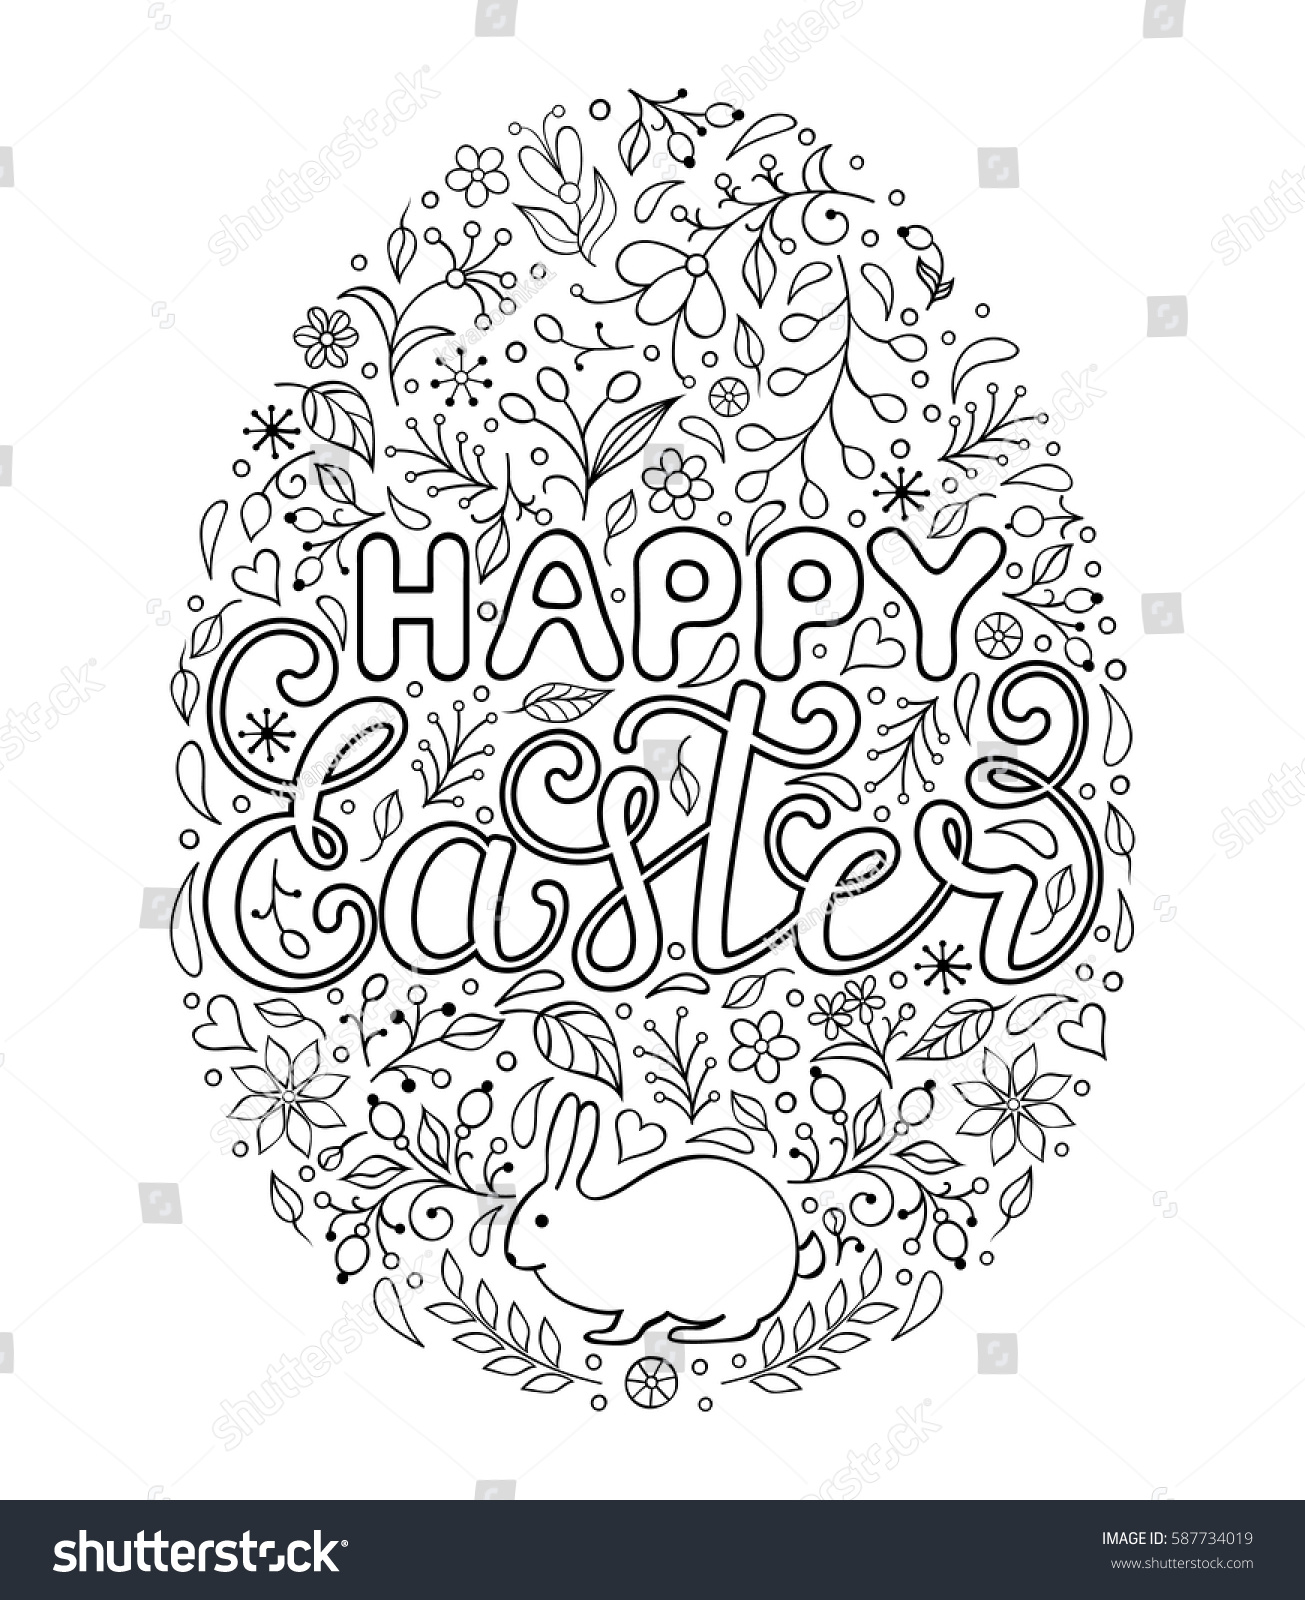 Floral easter egg with handwriting inscription Happy Easter on white background Coloring page for children